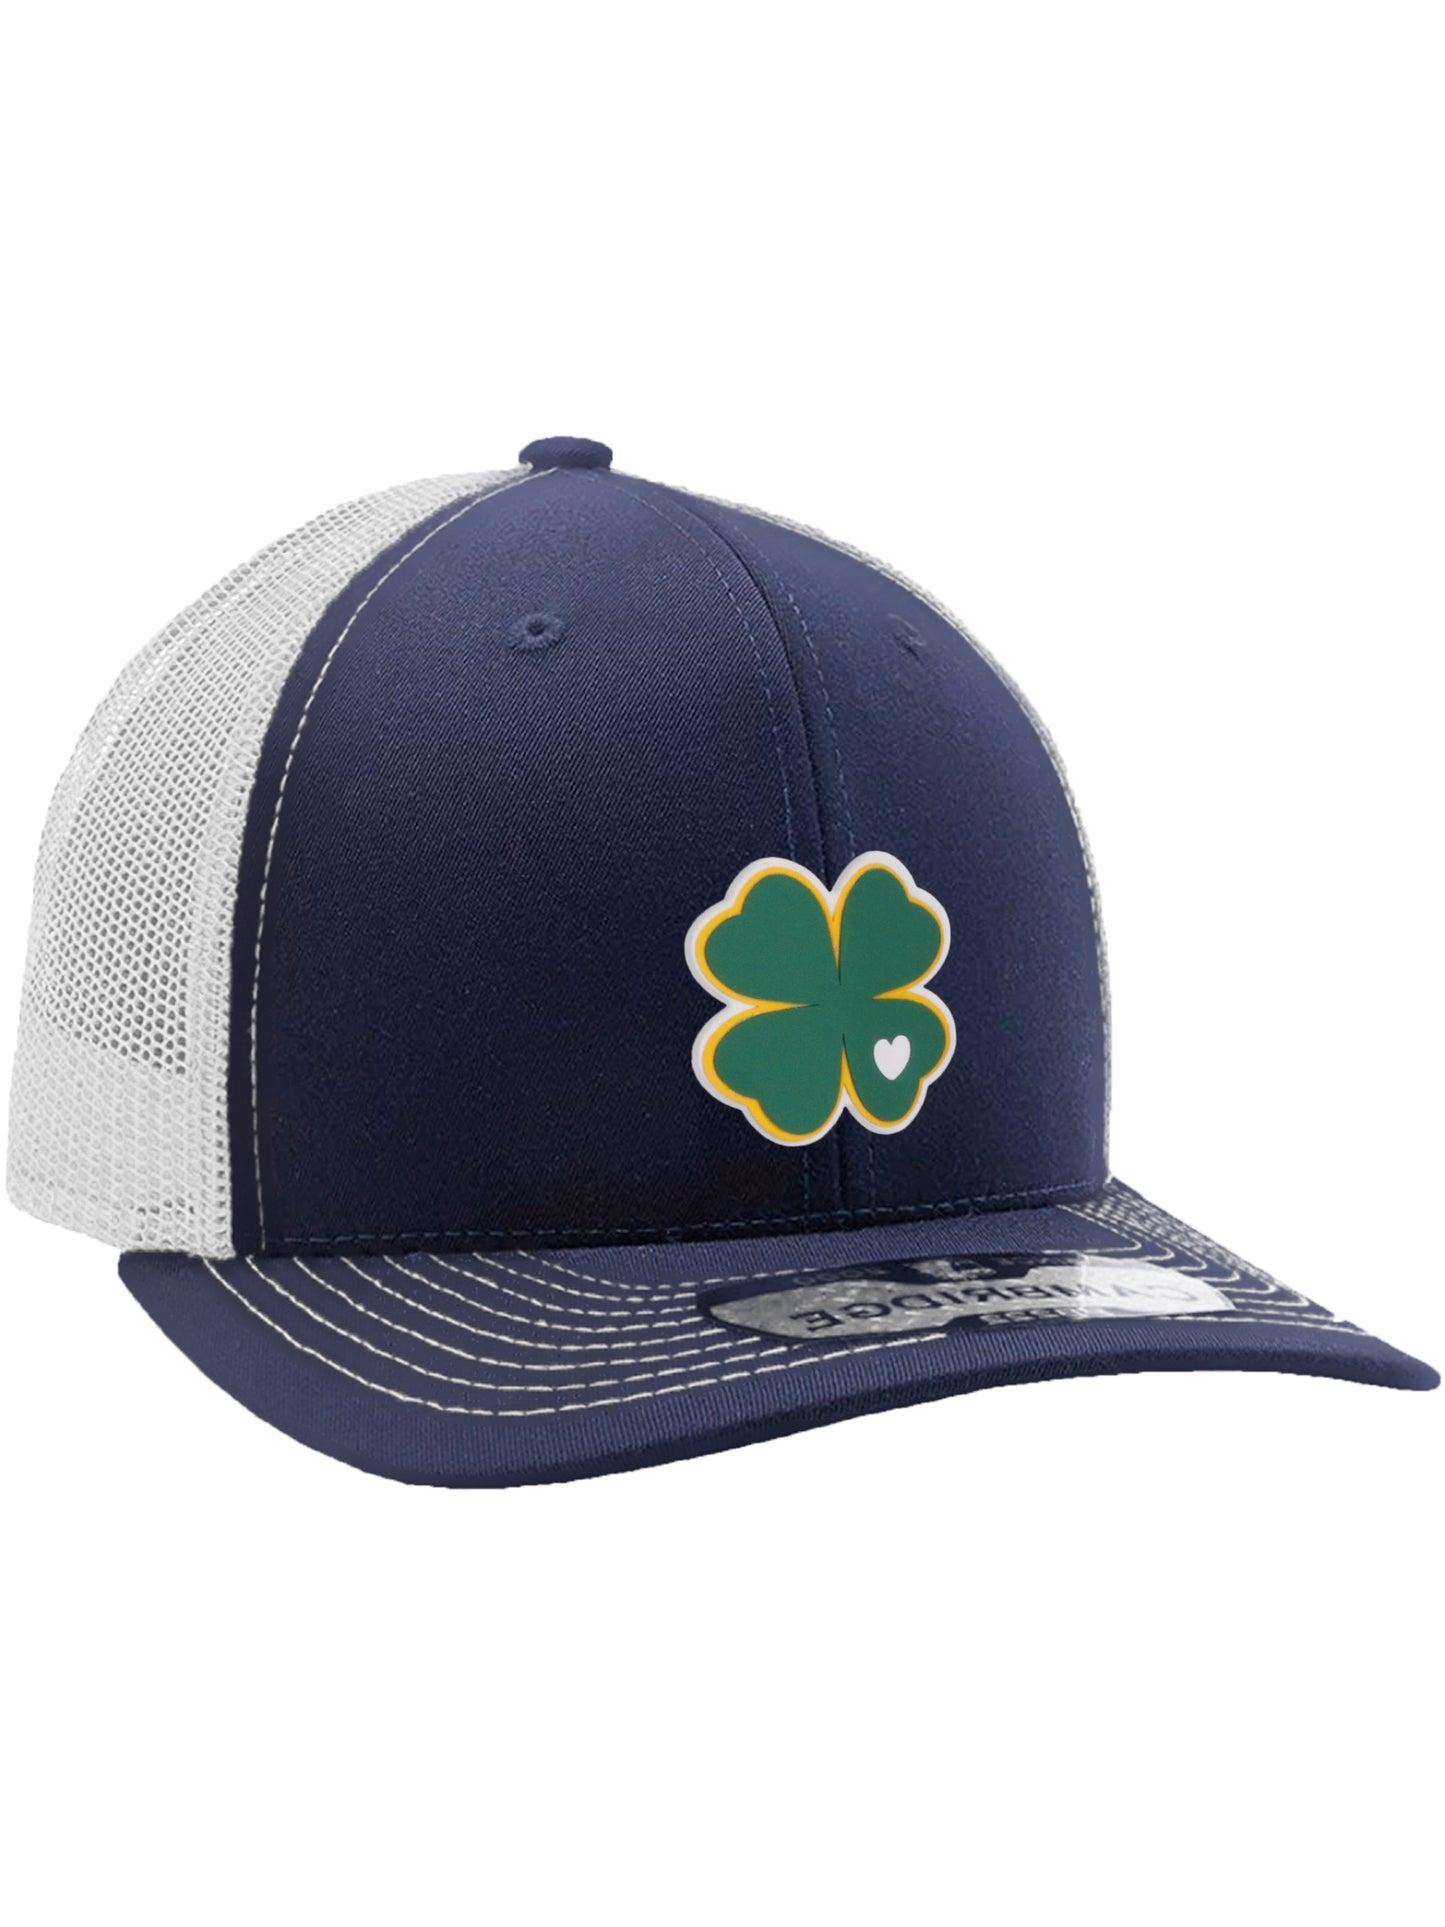 Daxton Baseball Trucker Hat St.Patrick Day 3D Lucky Clover Structured Mid Profile Cap